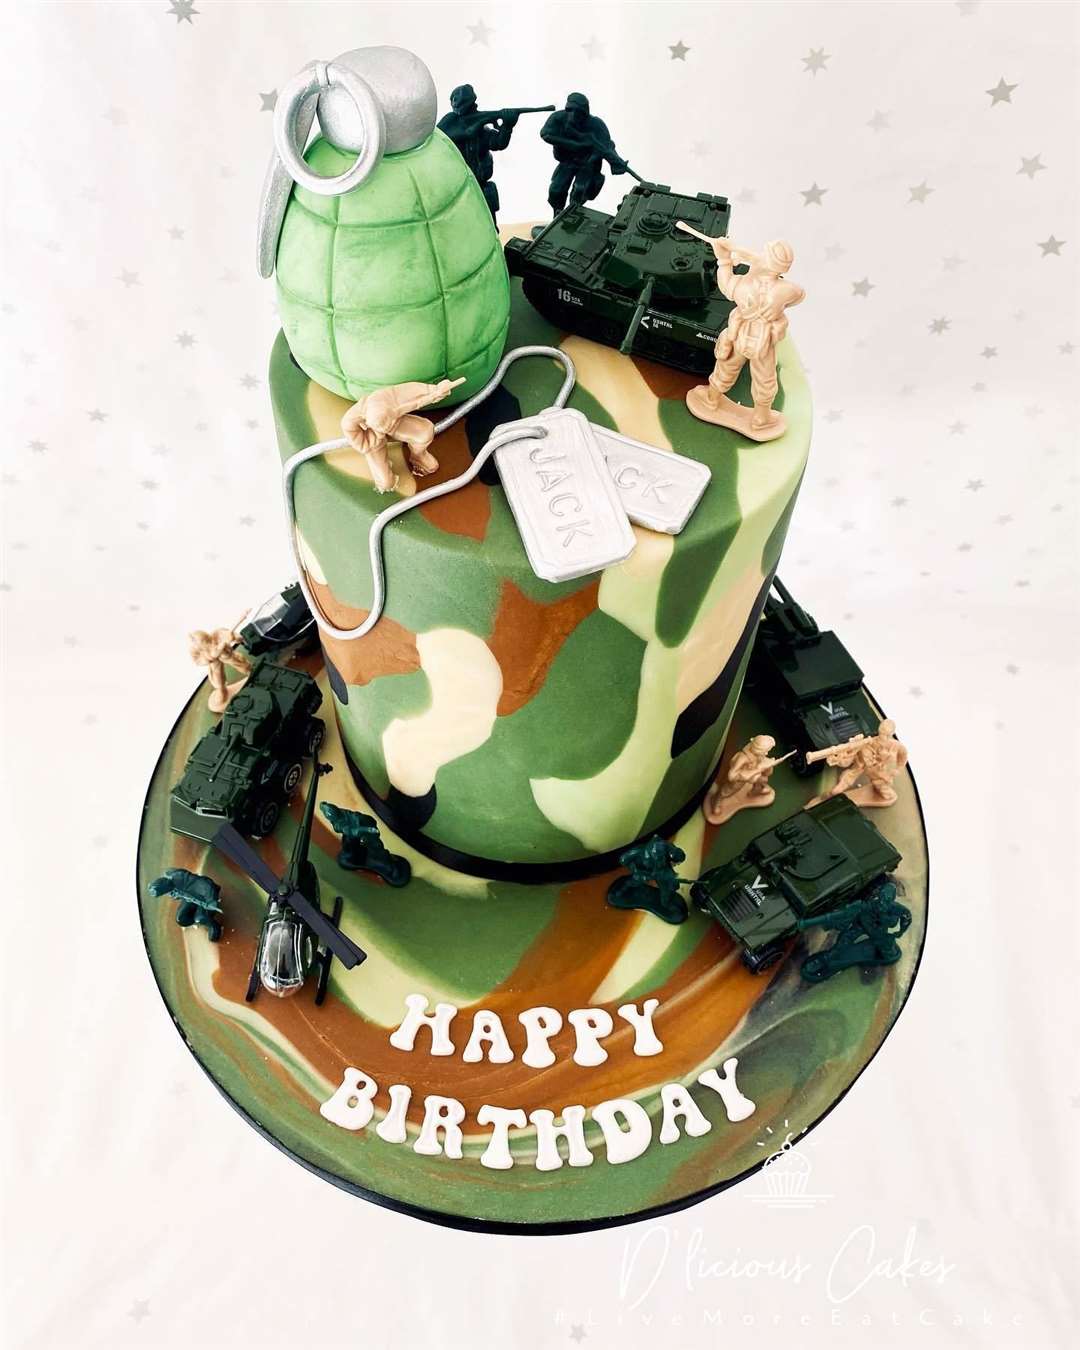 Kelly Jones, owner of D'licious cakes Maidstone, an army-themed birthday cake (55294854)